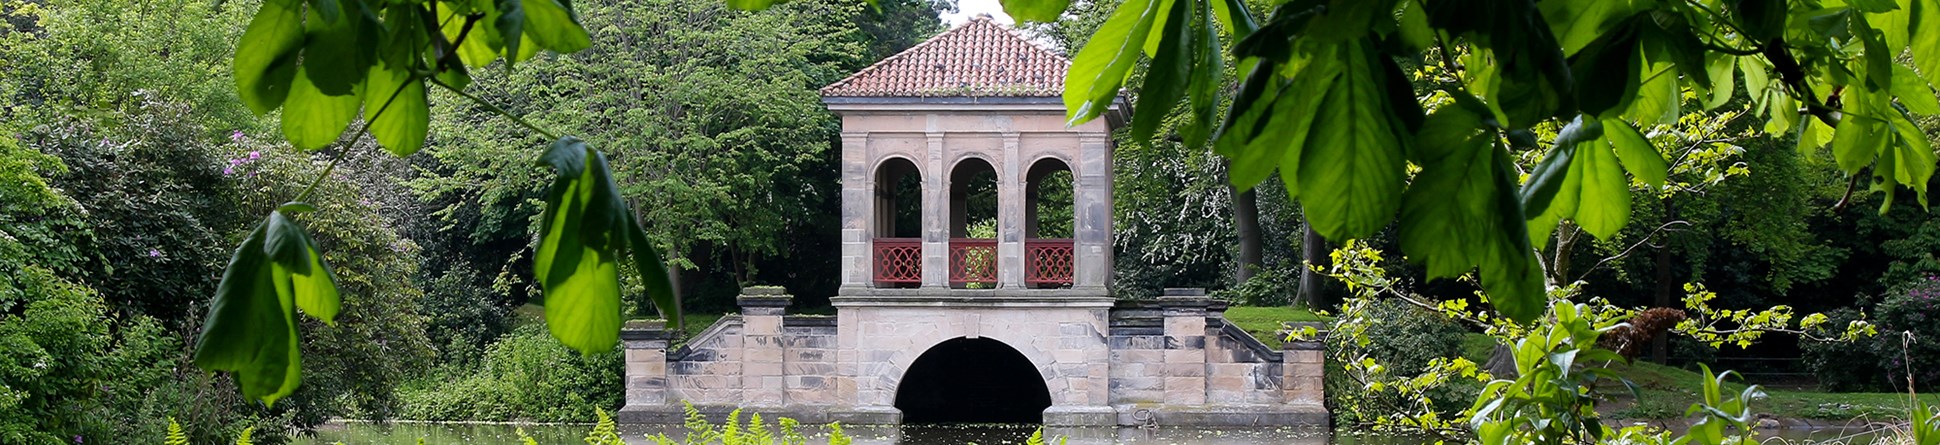 View across the lake to the Roman Boathouse in Birkenhead Park, The Wirral